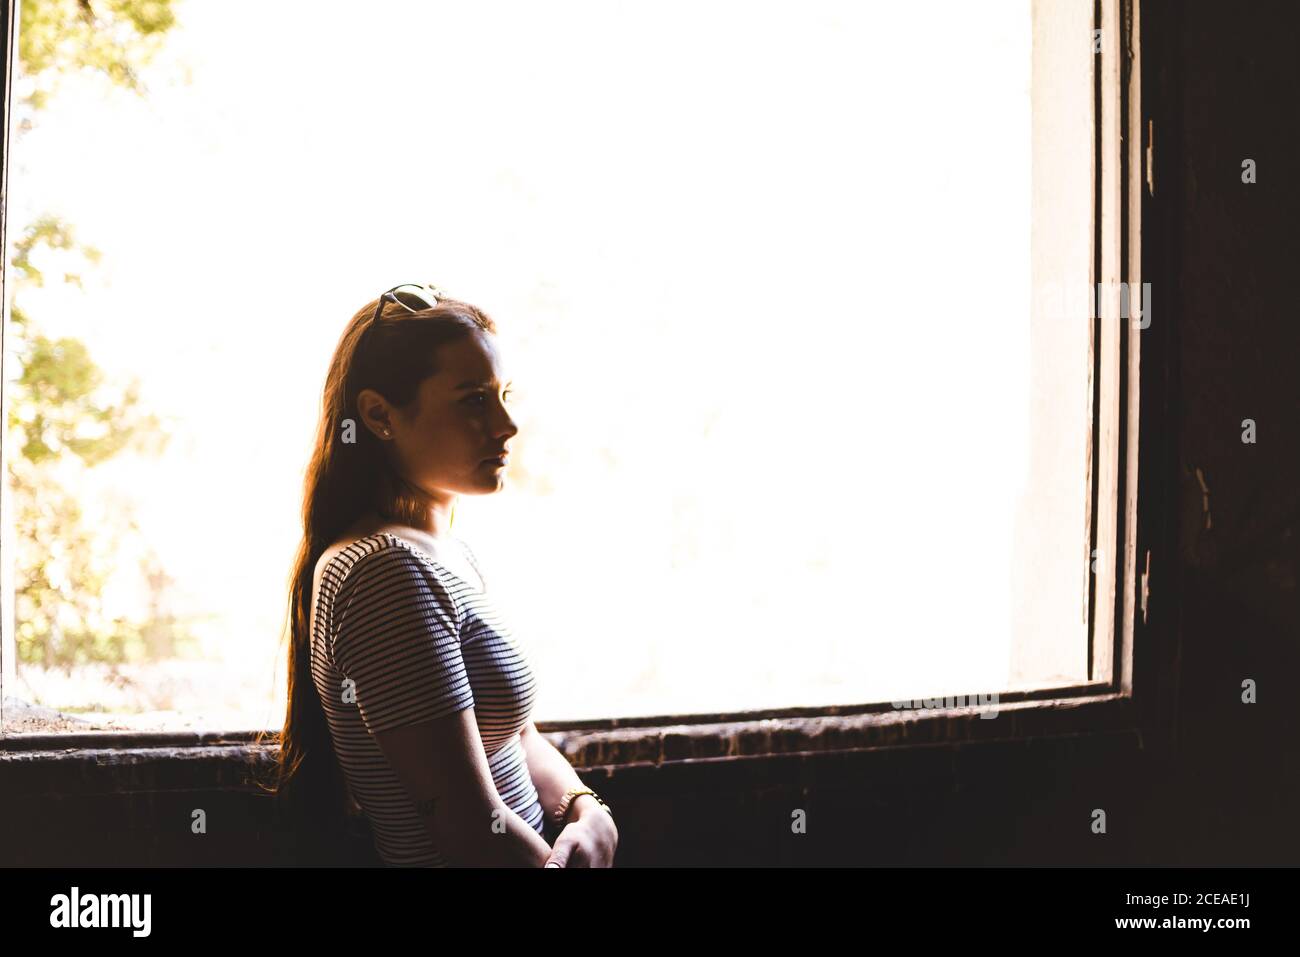 Silhouette of young Woman standing near beautiful window in old building Stock Photo